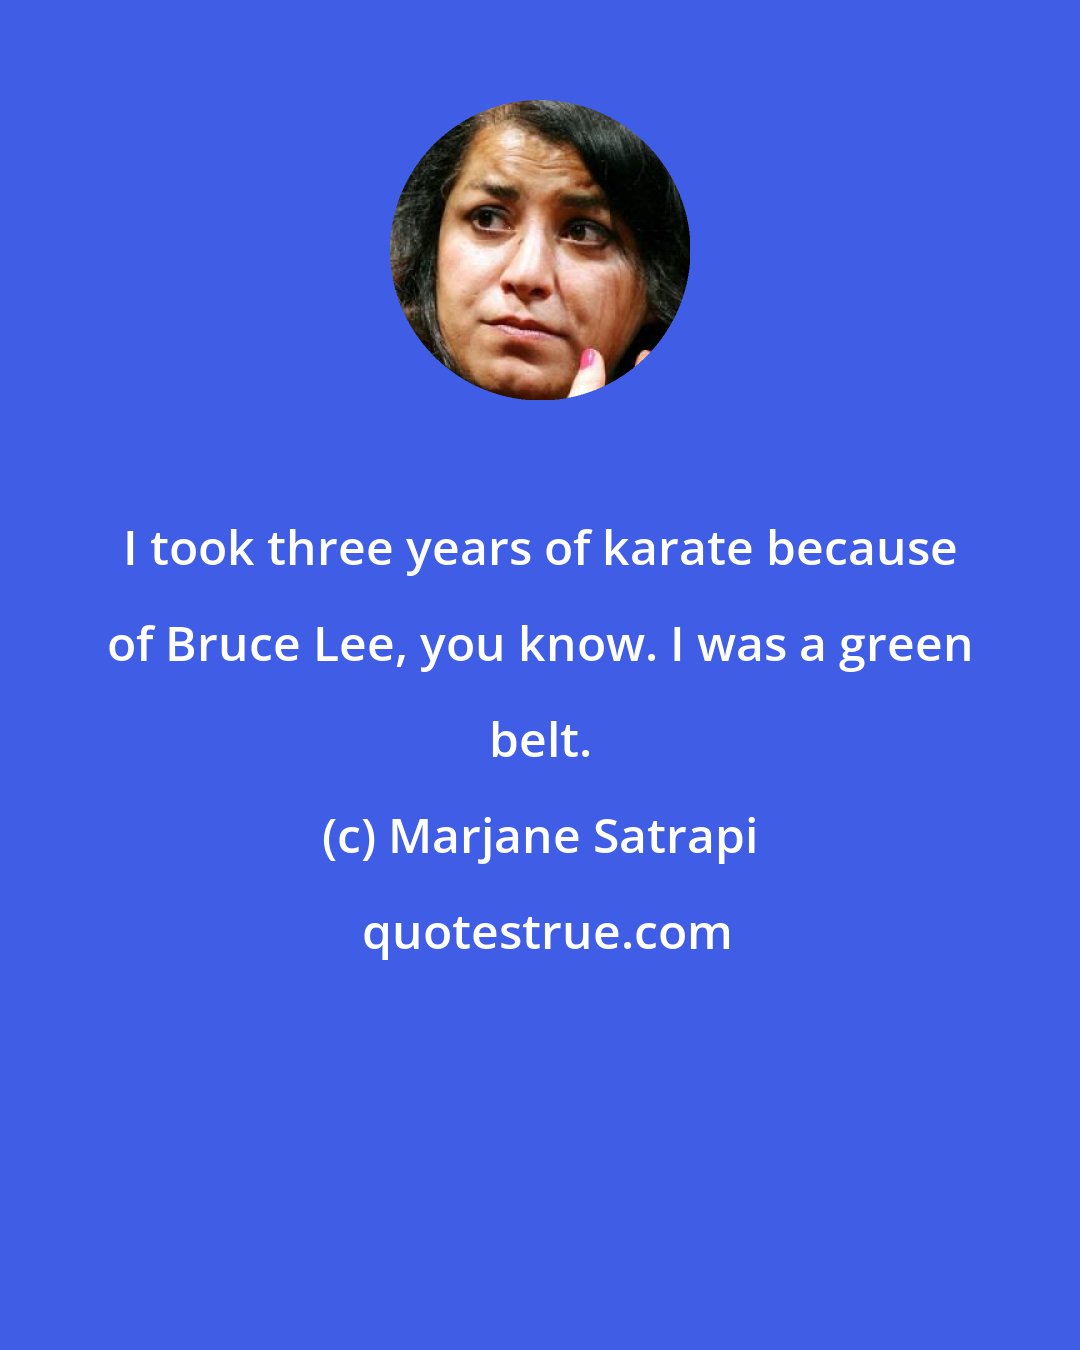 Marjane Satrapi: I took three years of karate because of Bruce Lee, you know. I was a green belt.